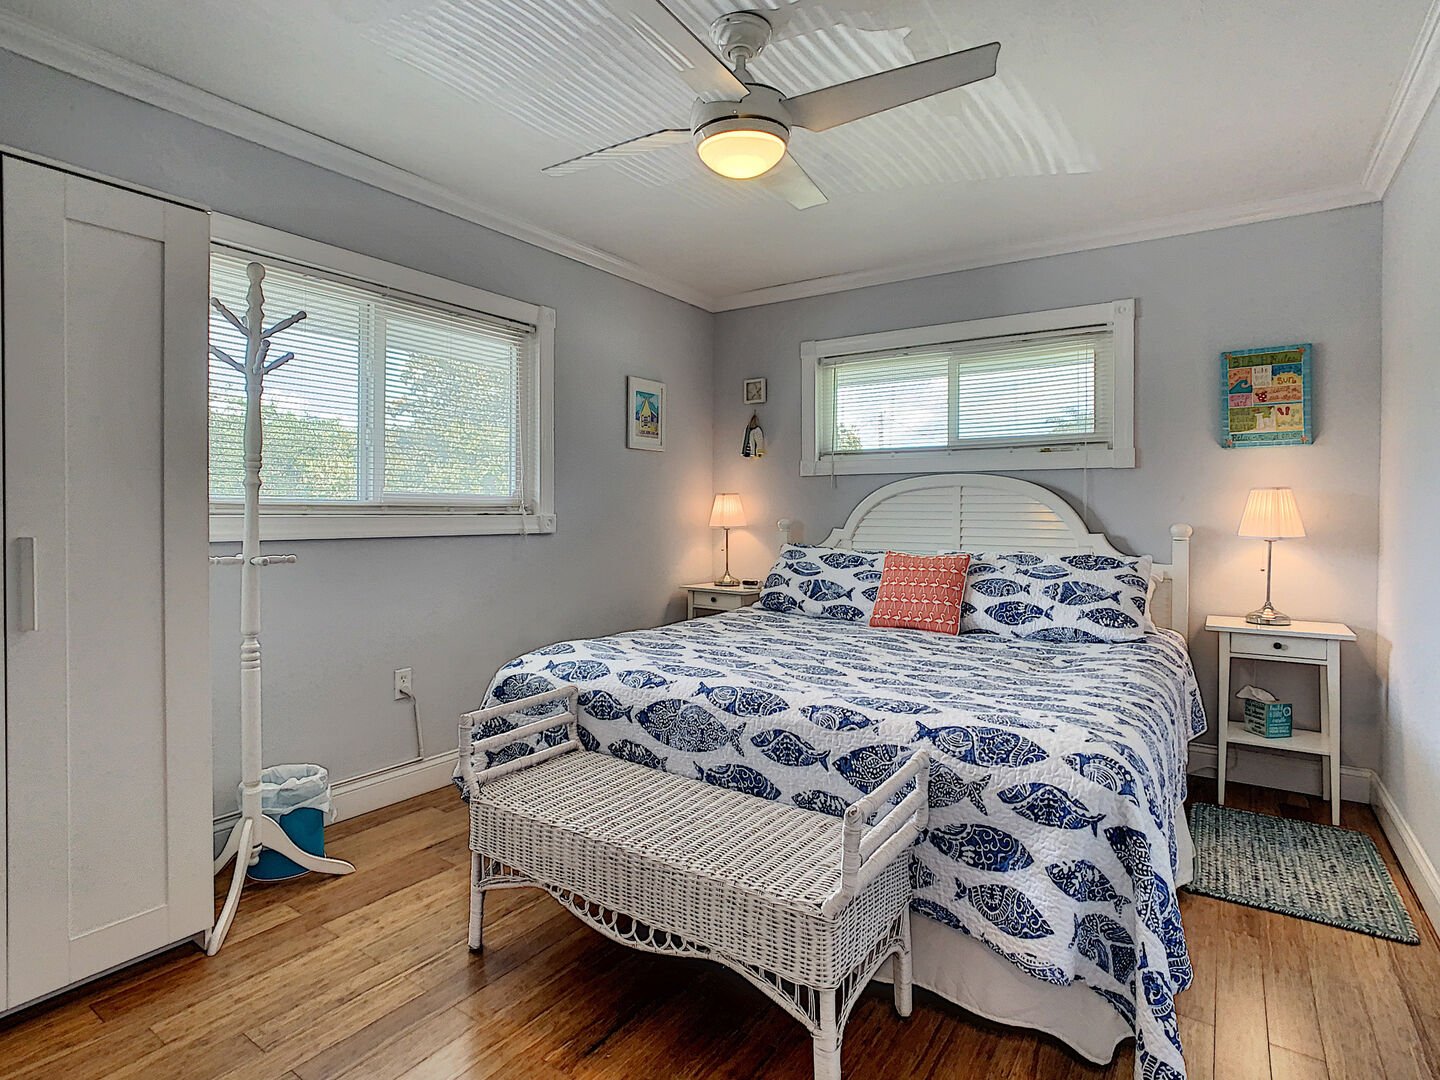 Master bedroom in our vacation rental in New Smyrna Beach FL